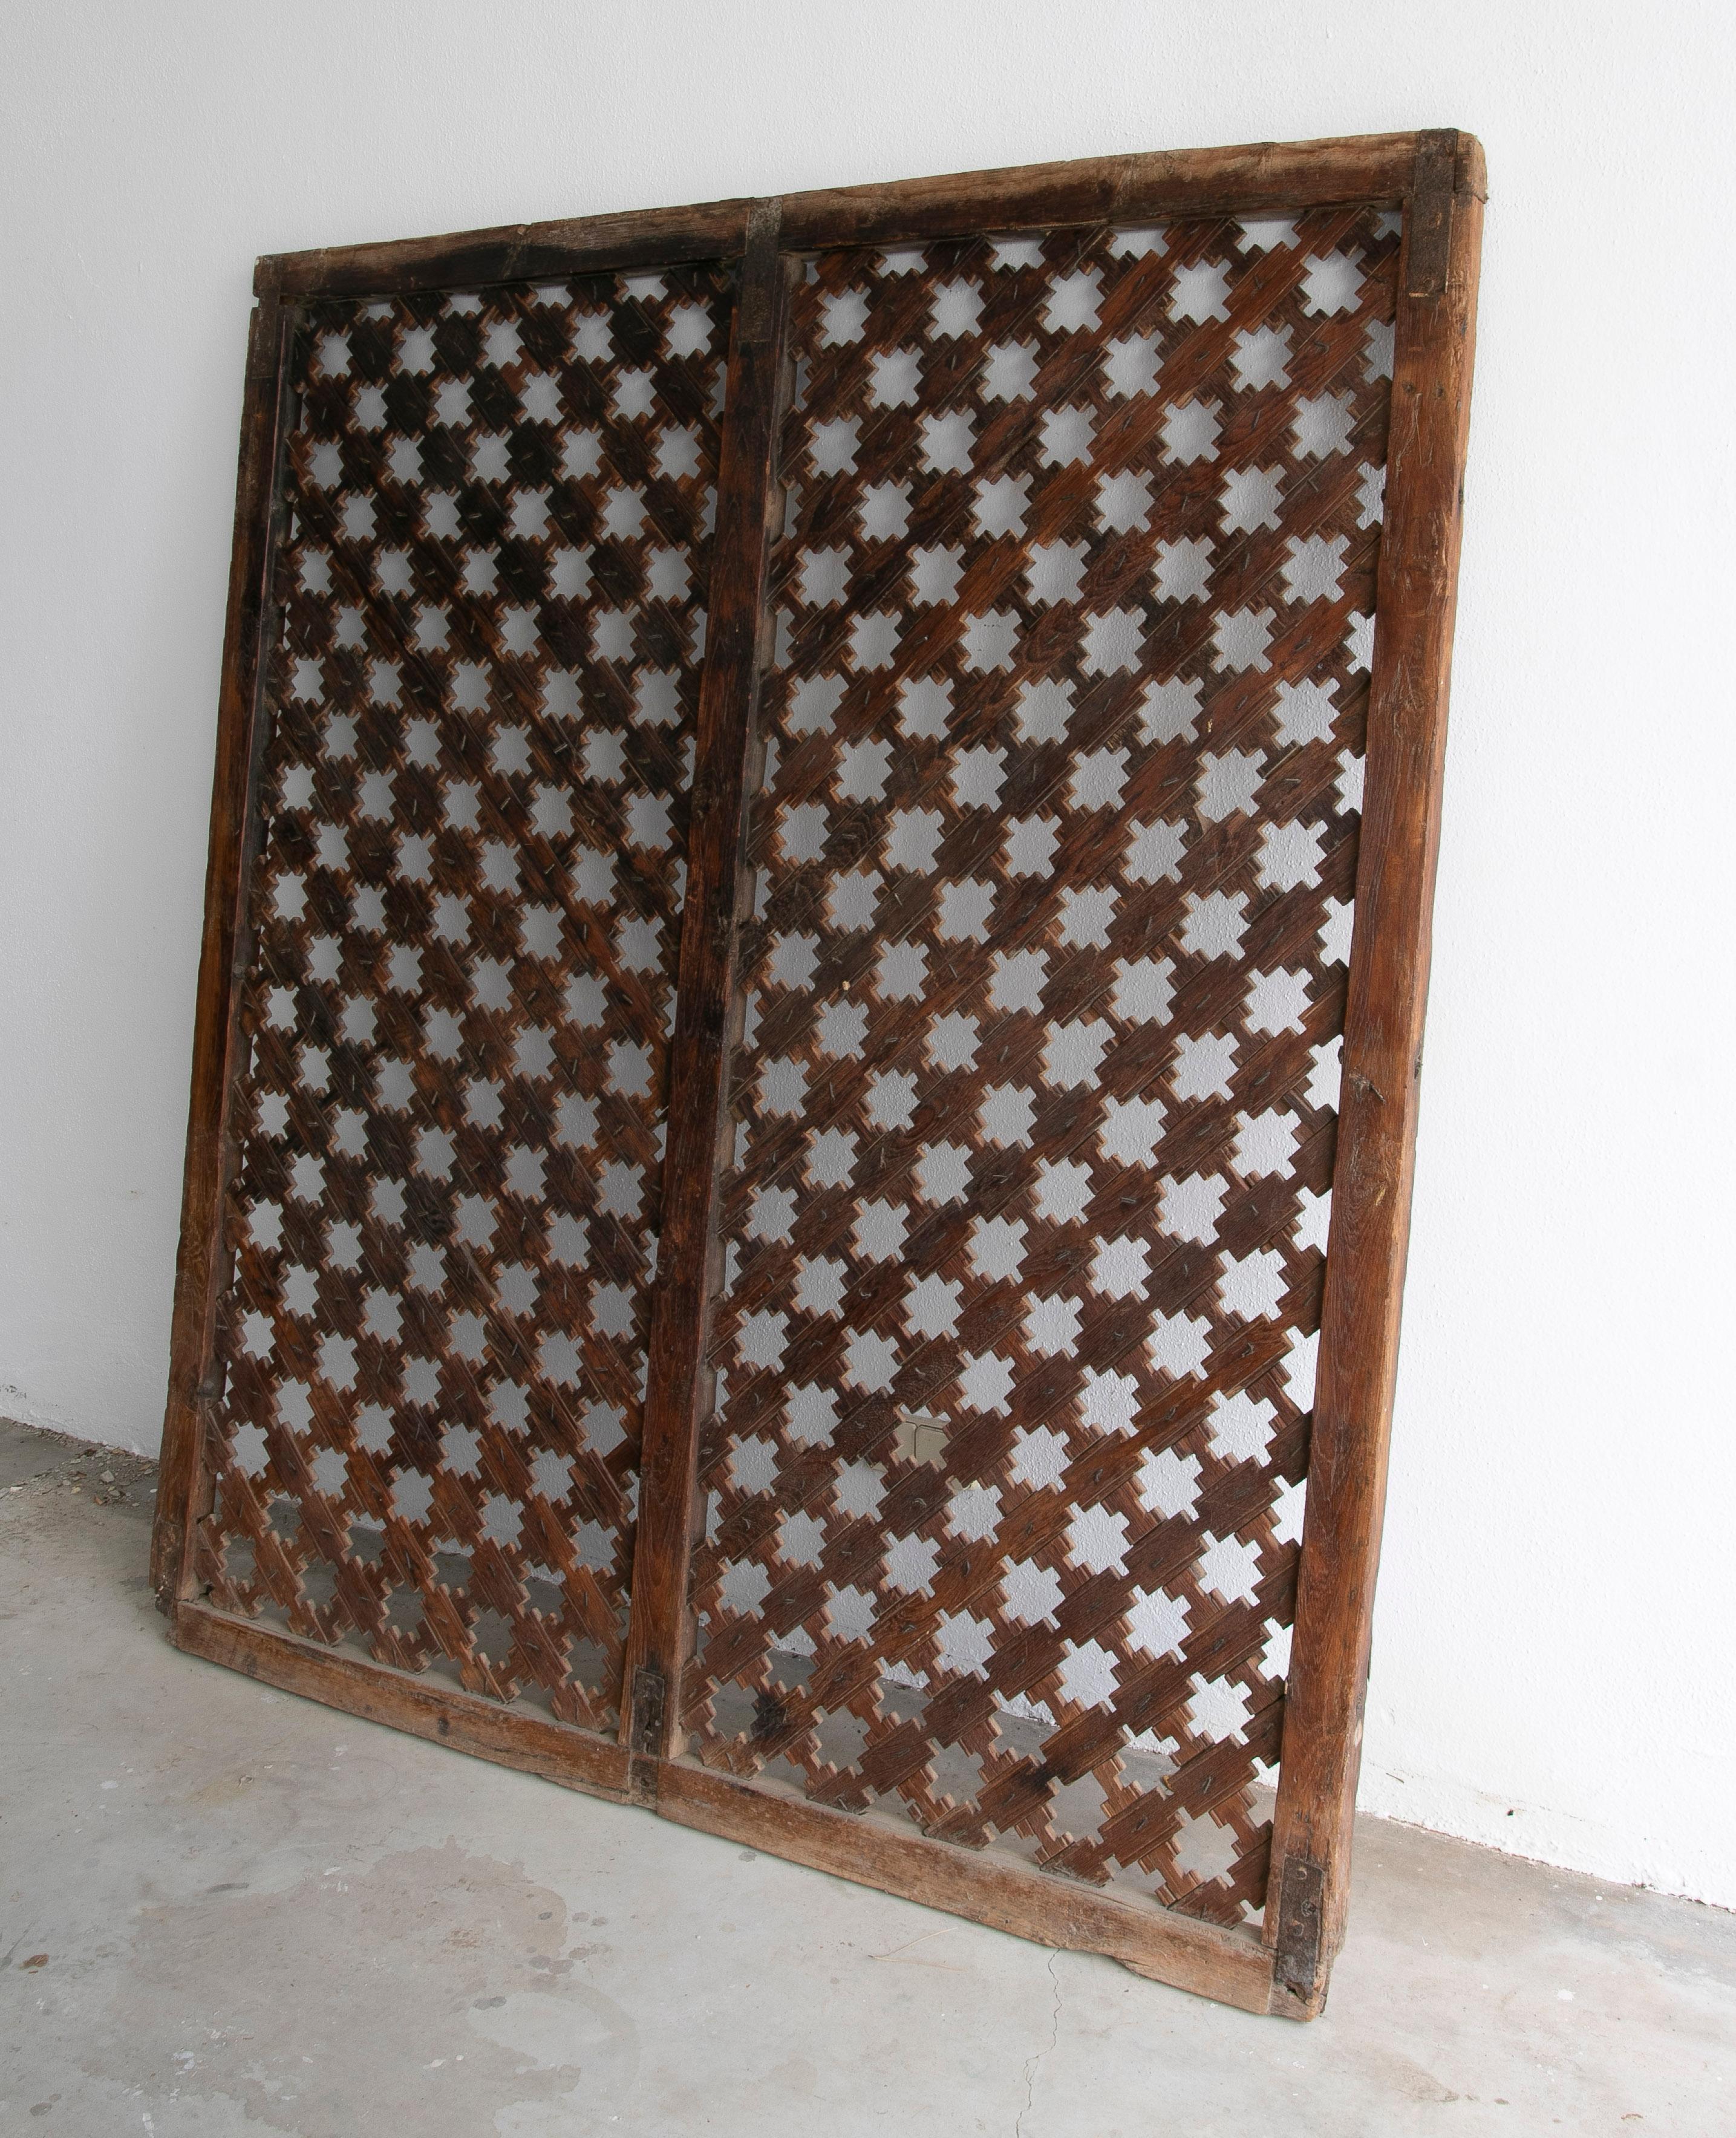 Vintage 1950s European wooden latticework screen with a geometric design created by crossing strips to form a grid and held with iron nails and reinforced corners.


